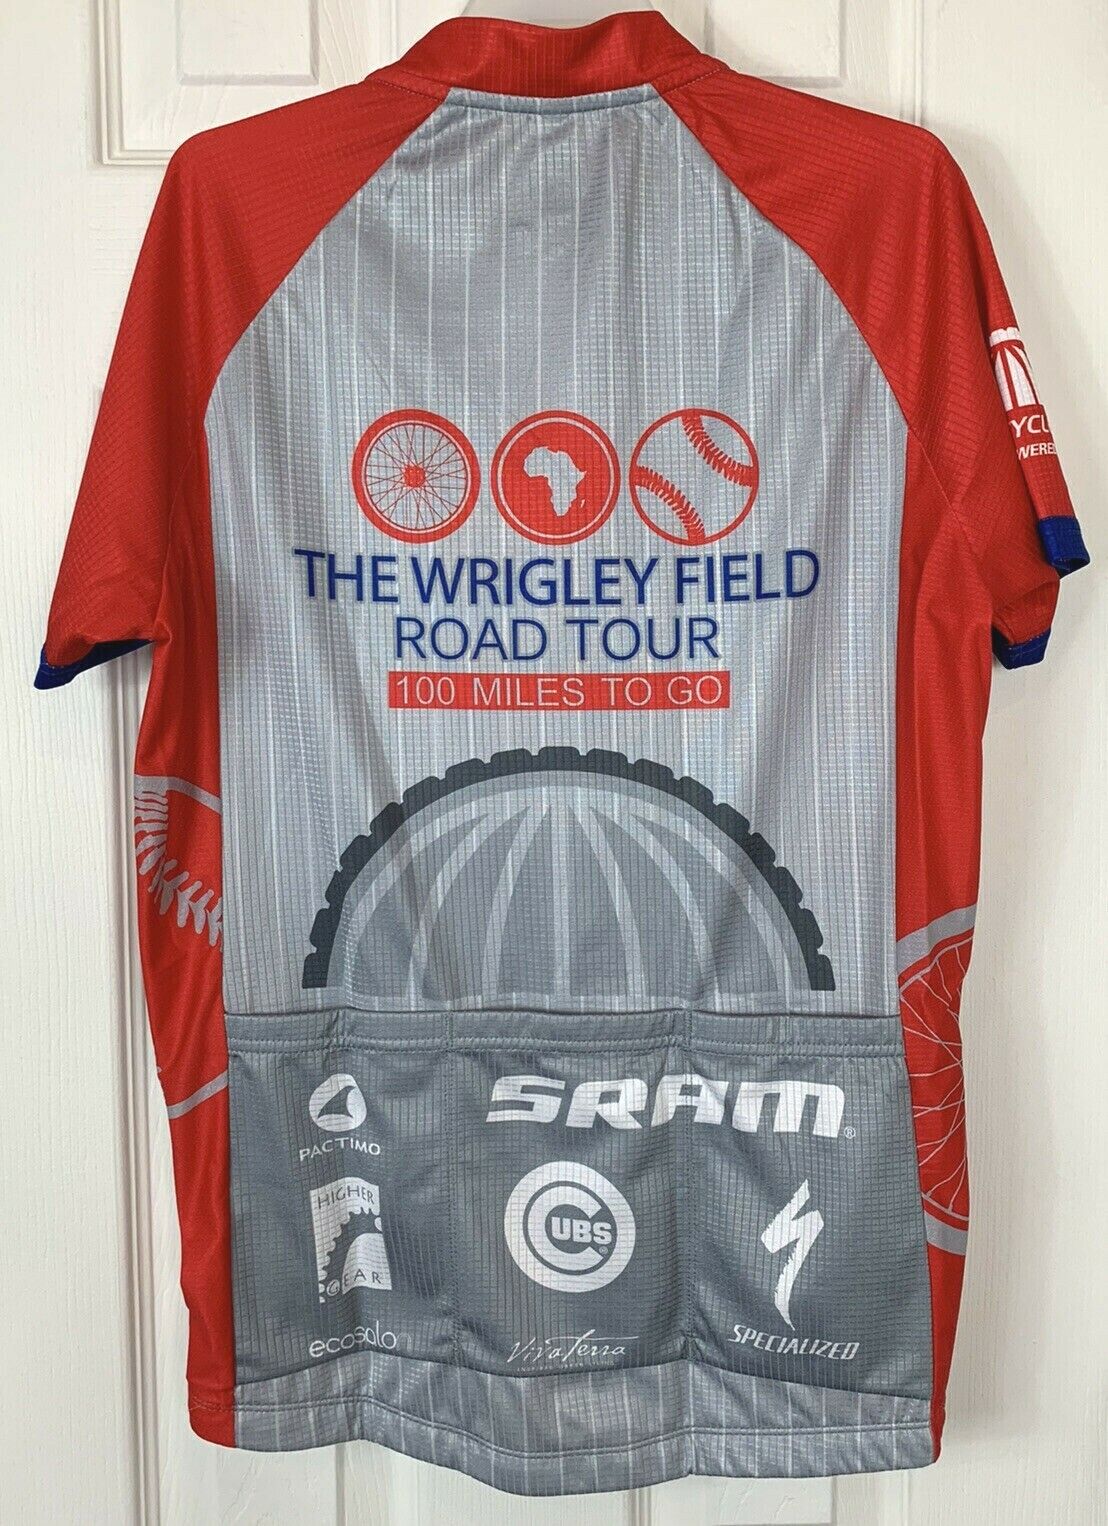 chicago cubs cycling jersey